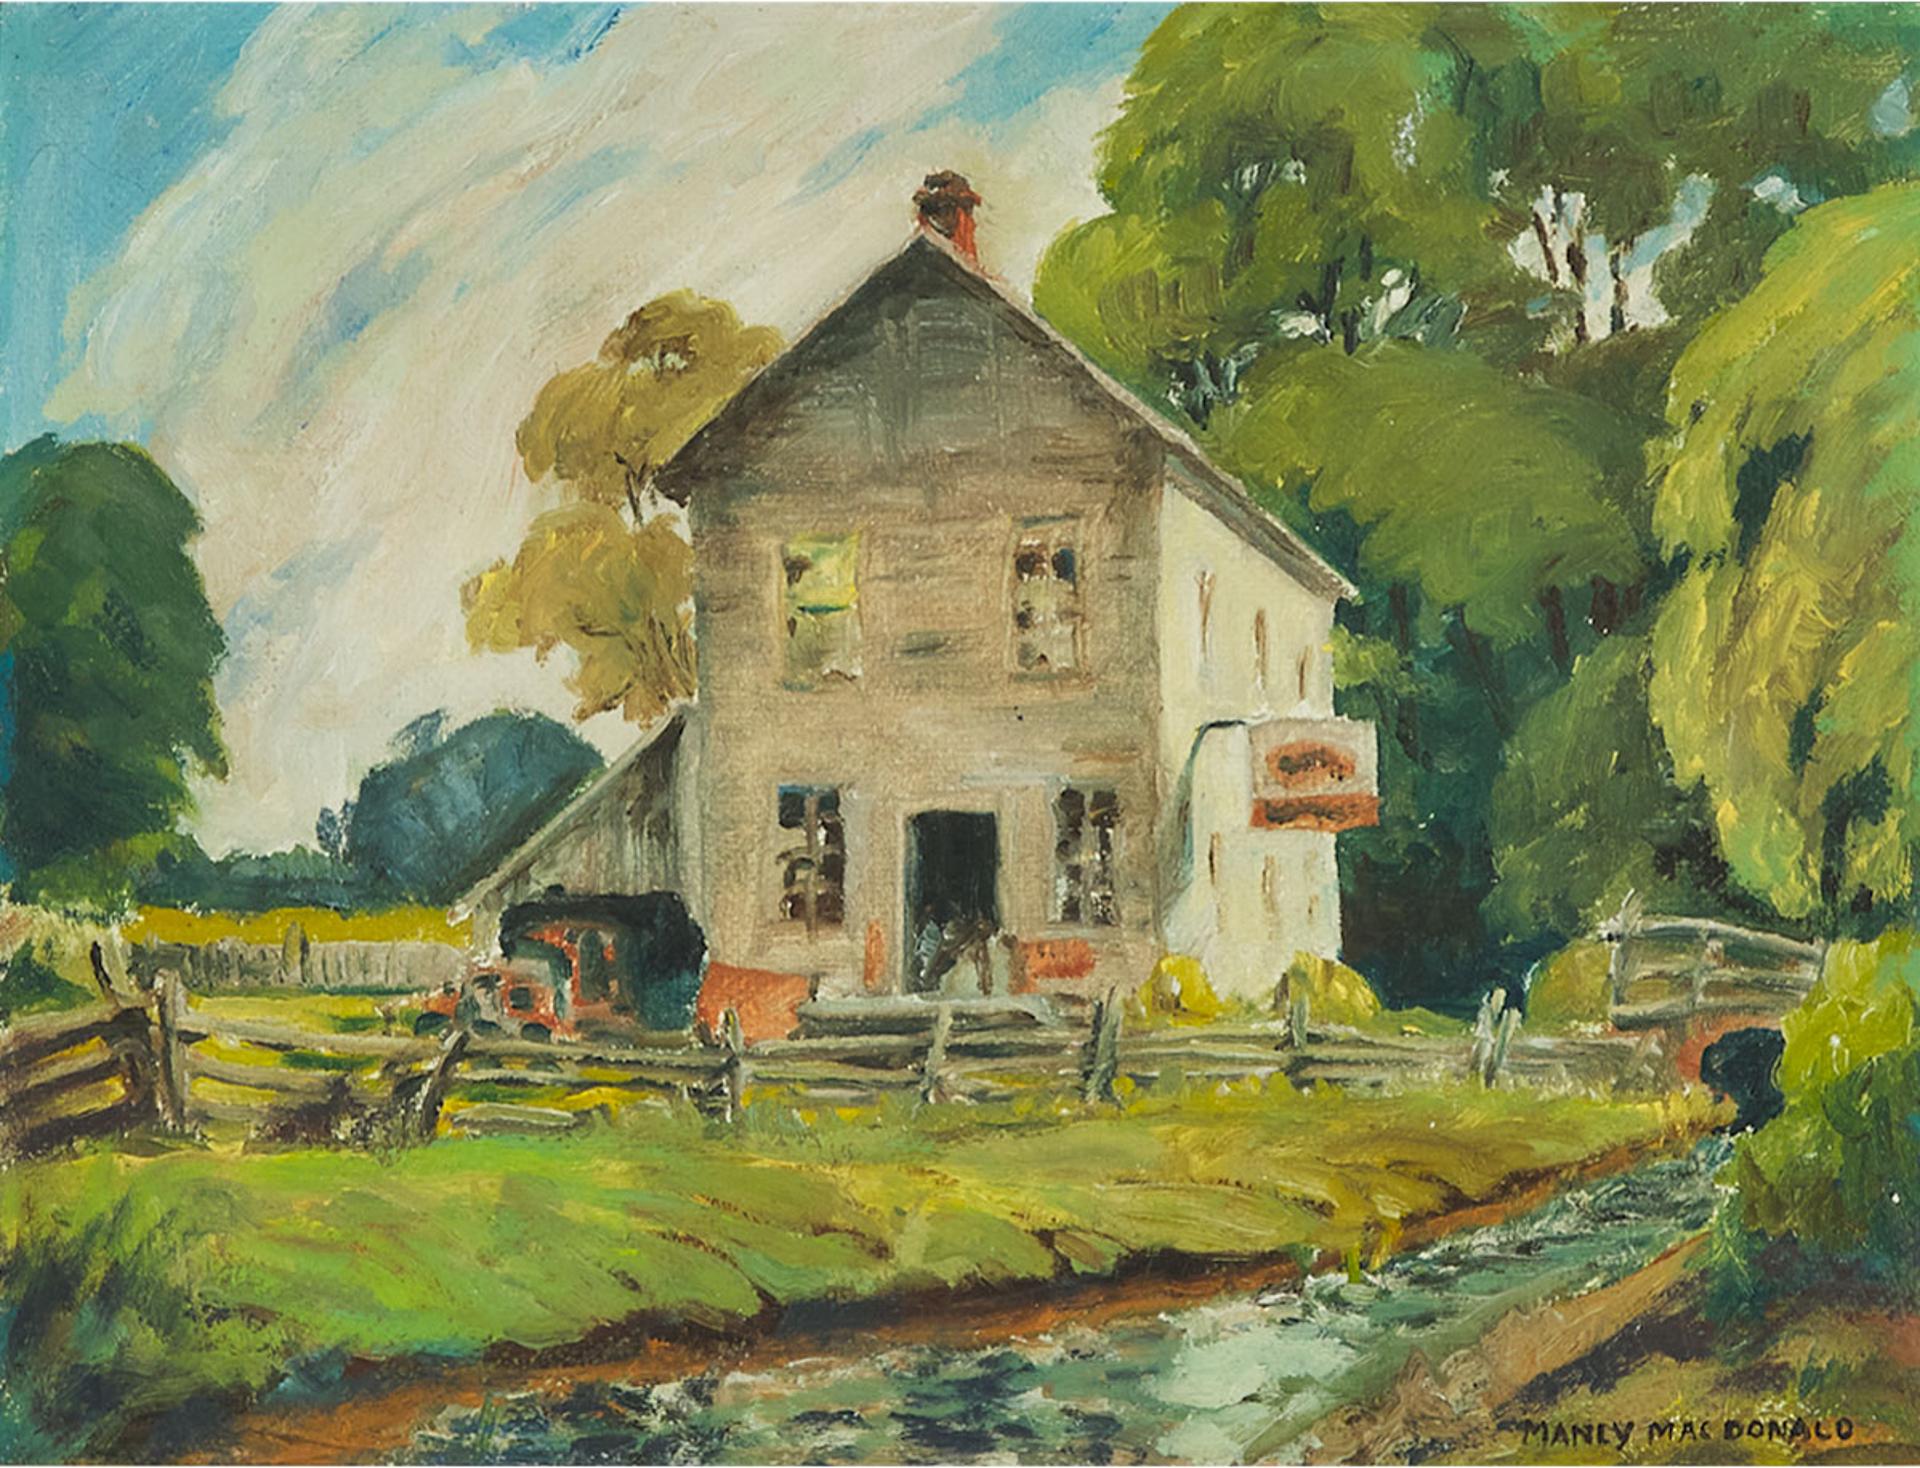 Manly Edward MacDonald (1889-1971) - The Old Mill, 1950